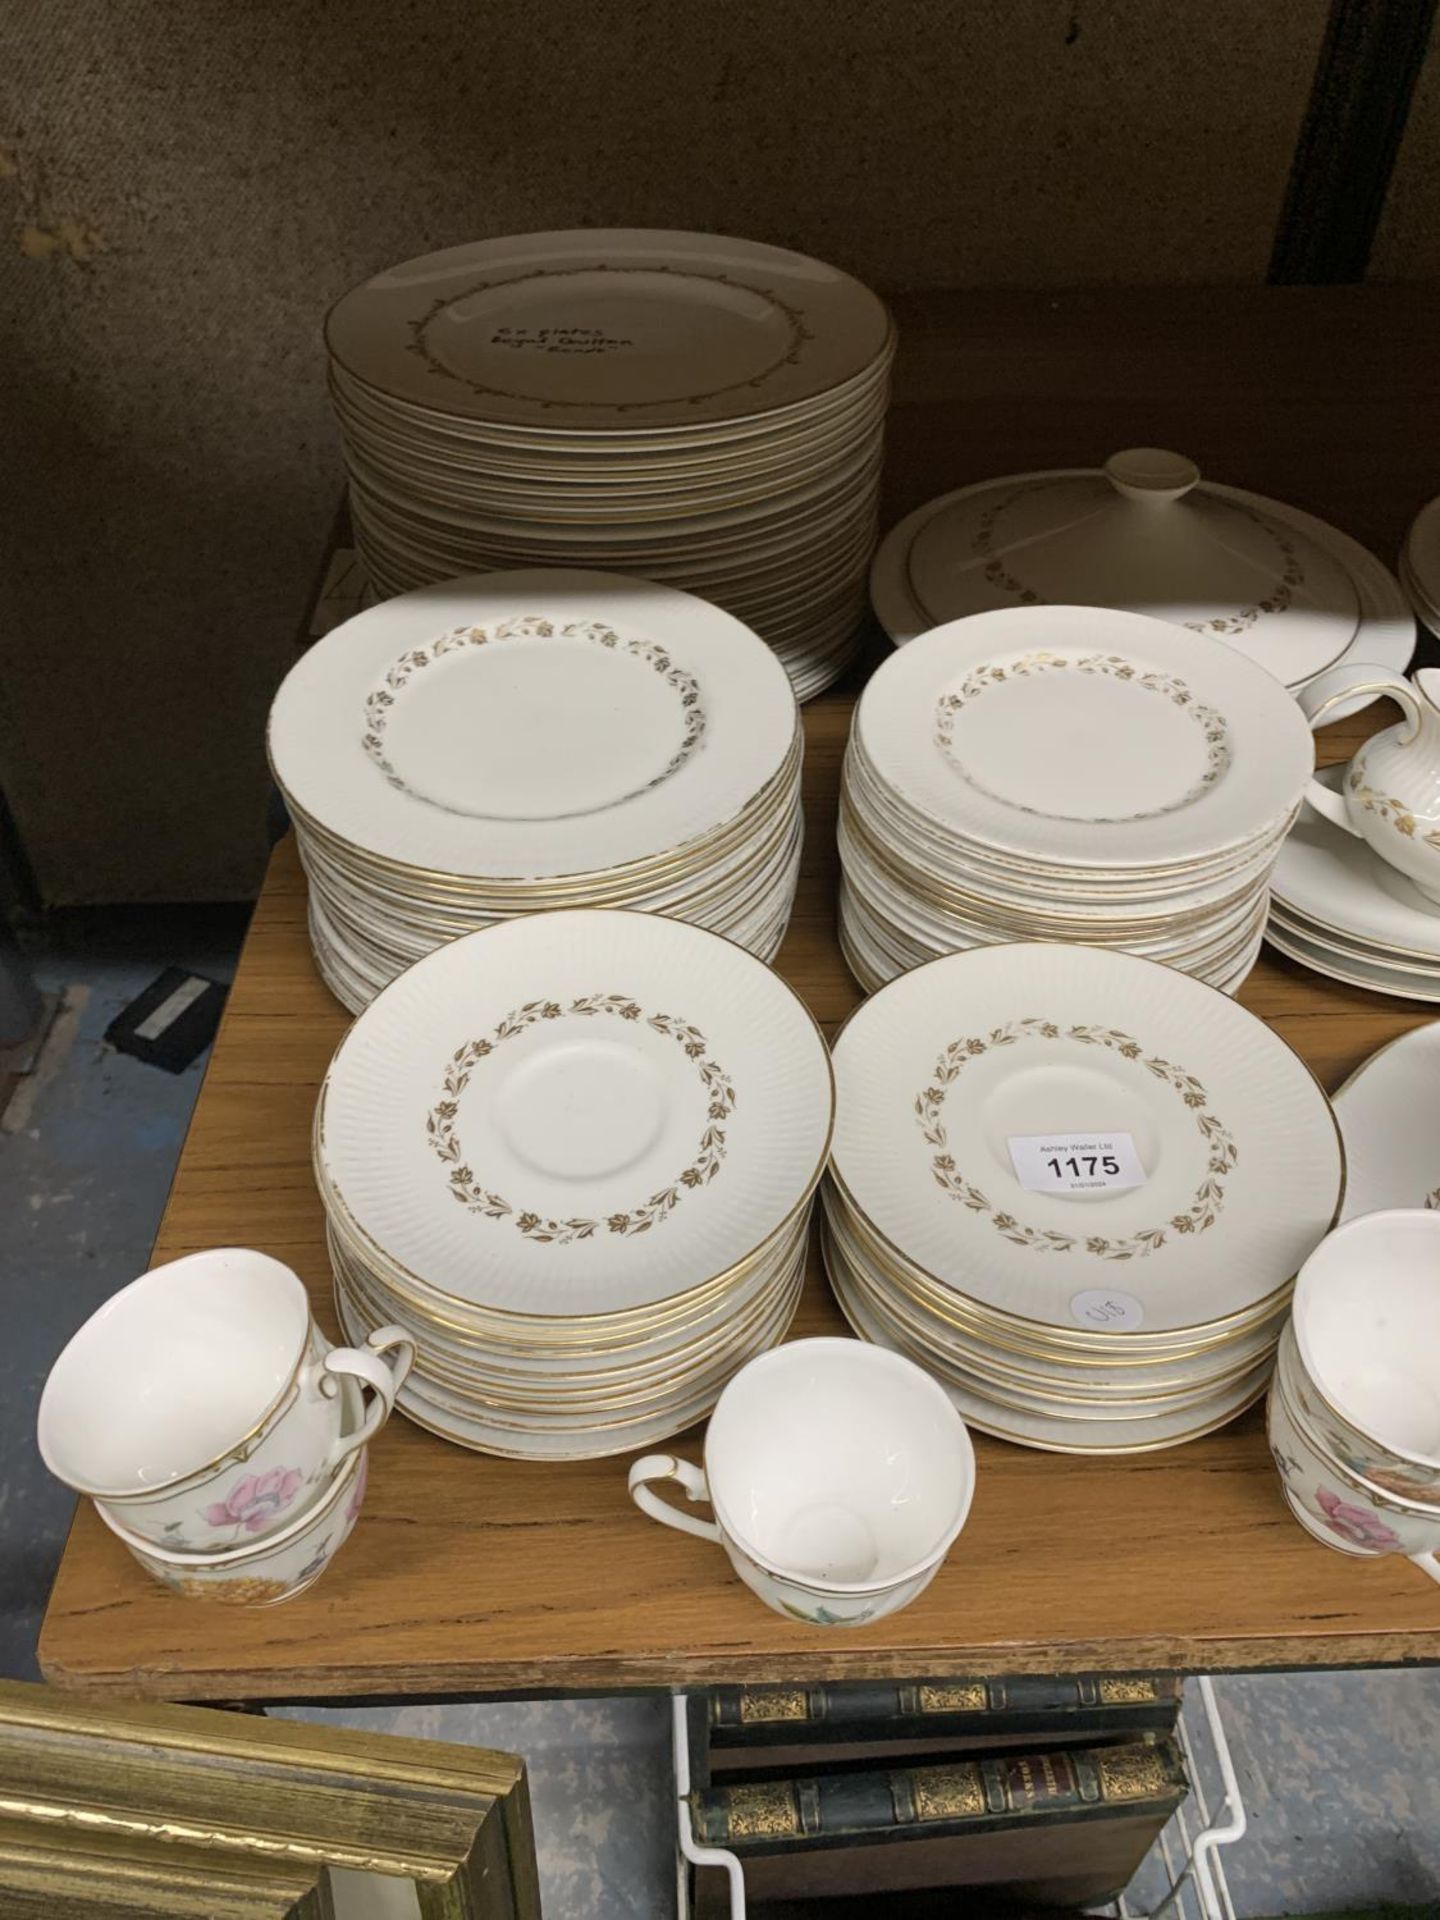 A LARGE QUANTITY OF ROYAL DOULTON 'FAIRFAX' AND 'RONDO' DINNER WARE TO INCLUDE VARIOUS SIZES OF - Image 2 of 4